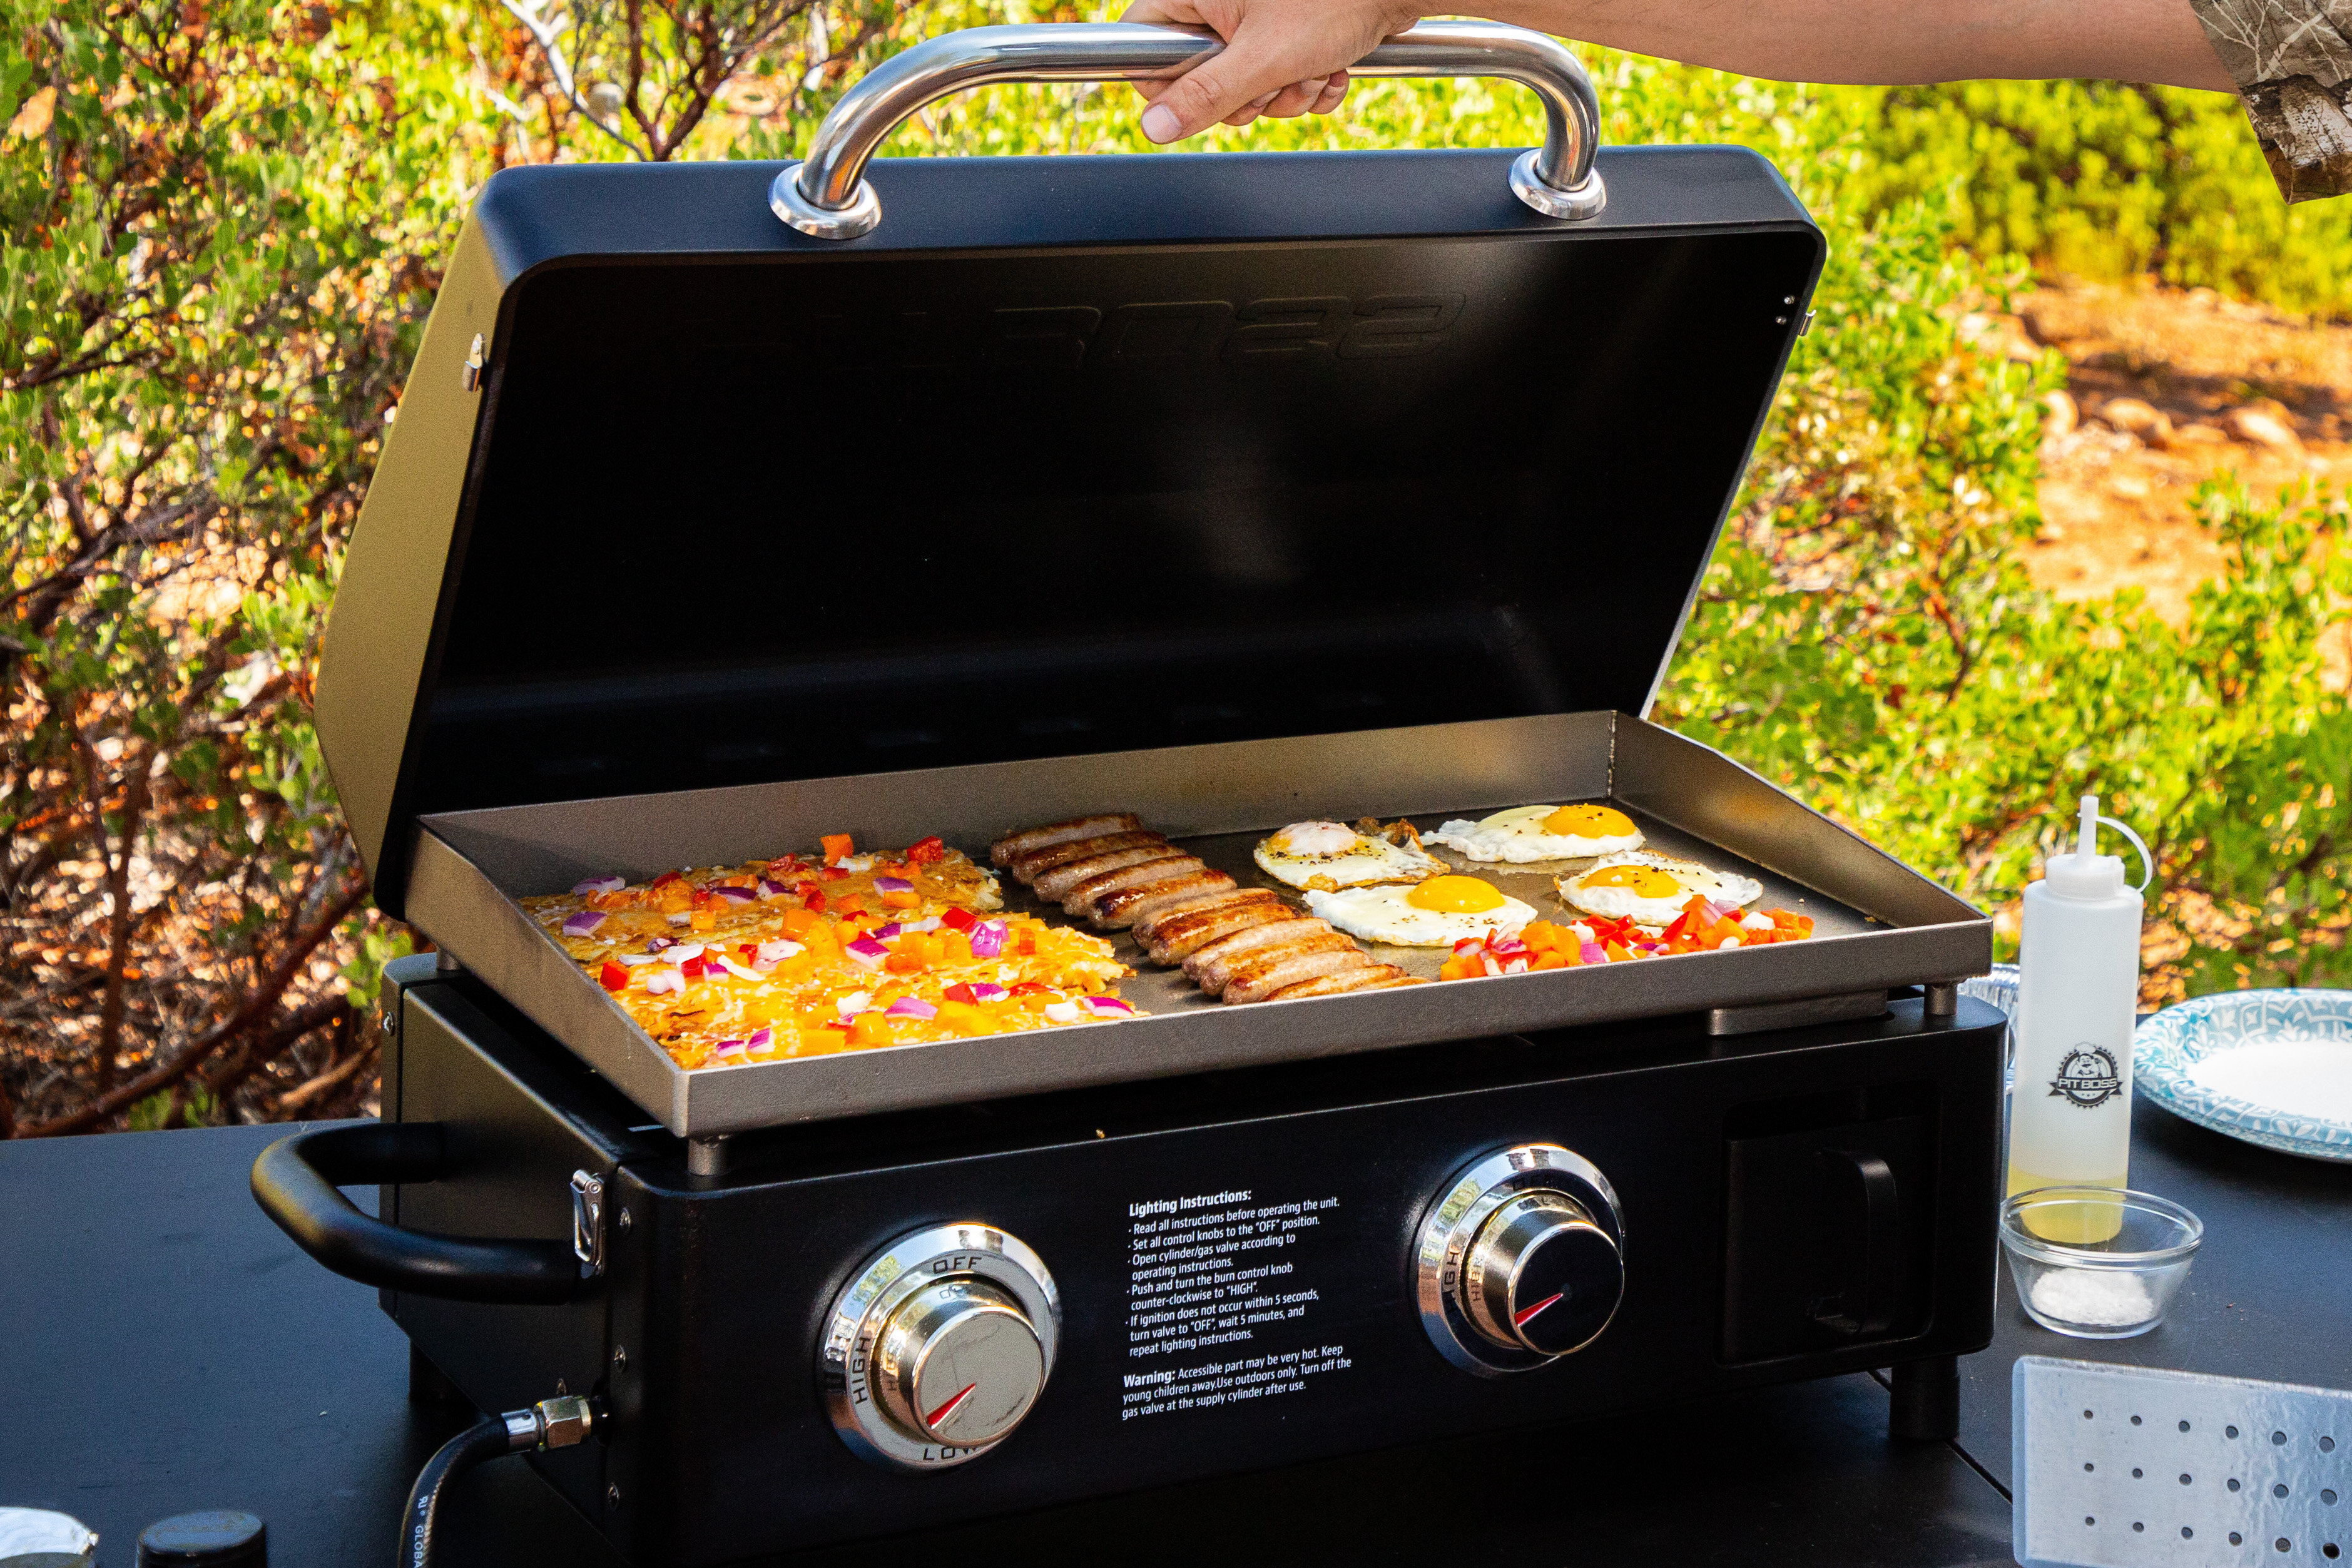 Blackstone Tailgater Stainless Steel 2 Burner Portable Gas Grill and  Griddle Combo Total 35,000 BTUs for Indoor or Backyard, Outdoor, Patio,  Picnic, Garden Cooking